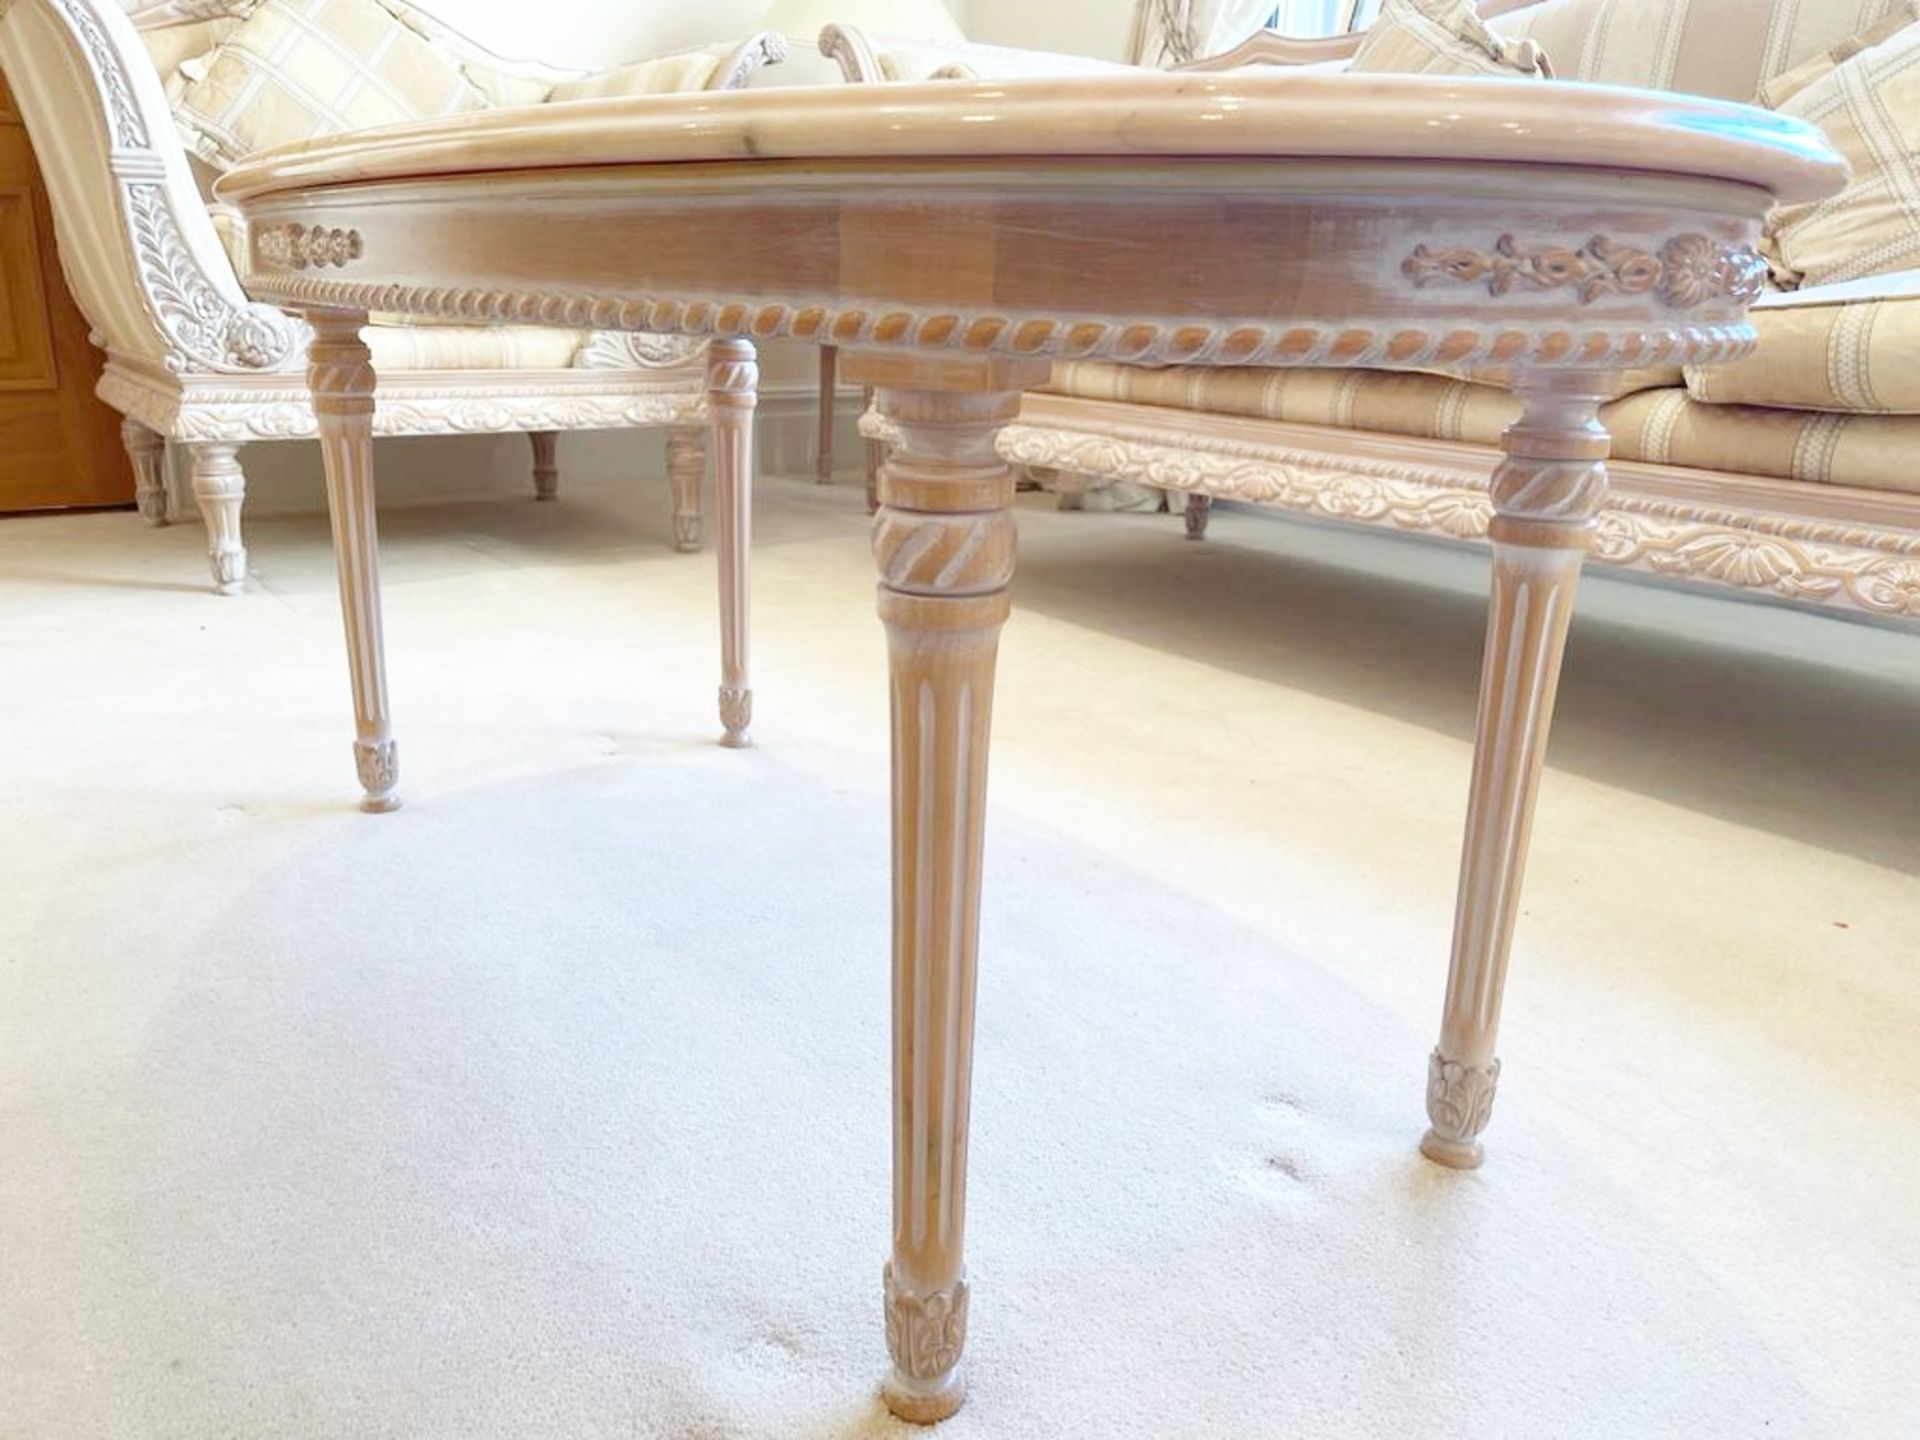 1 x French Shabby Chic Oval Coffee Table With Marble Top and Ornate Carved Base - Size: H50 x W118 x - Image 6 of 12